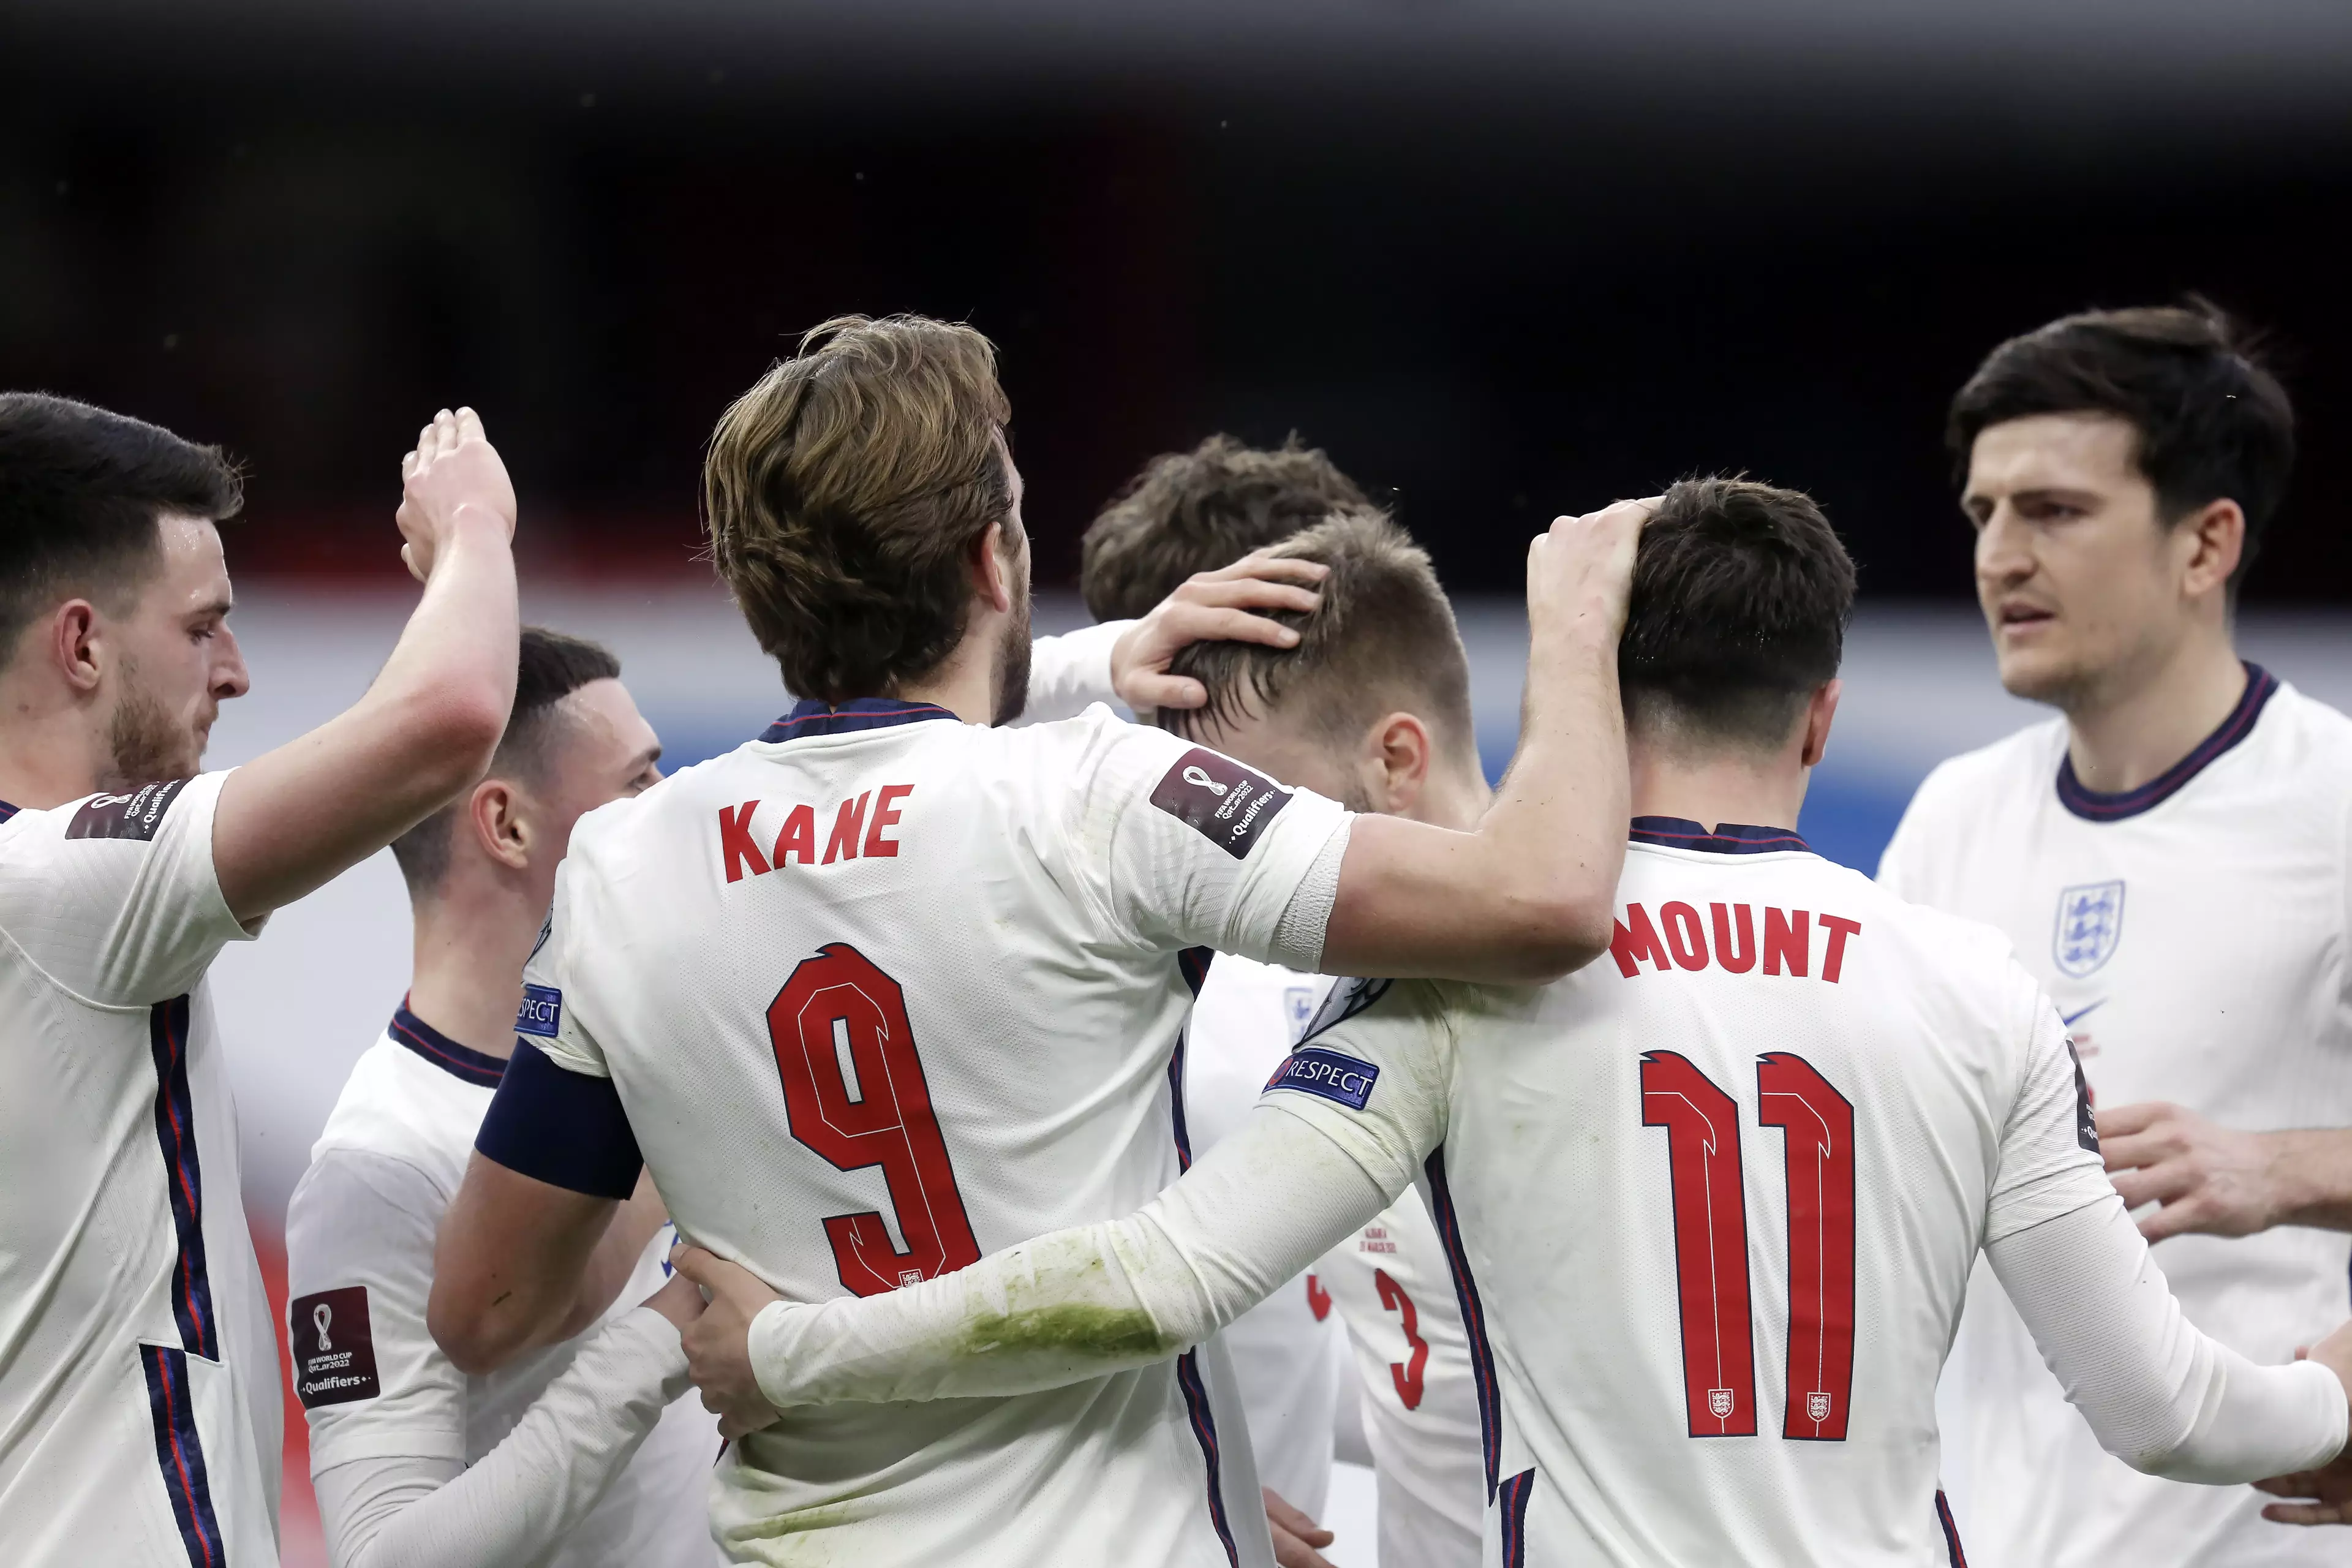 The Three Lions go into this year's contest with an extraordinarily talented squad